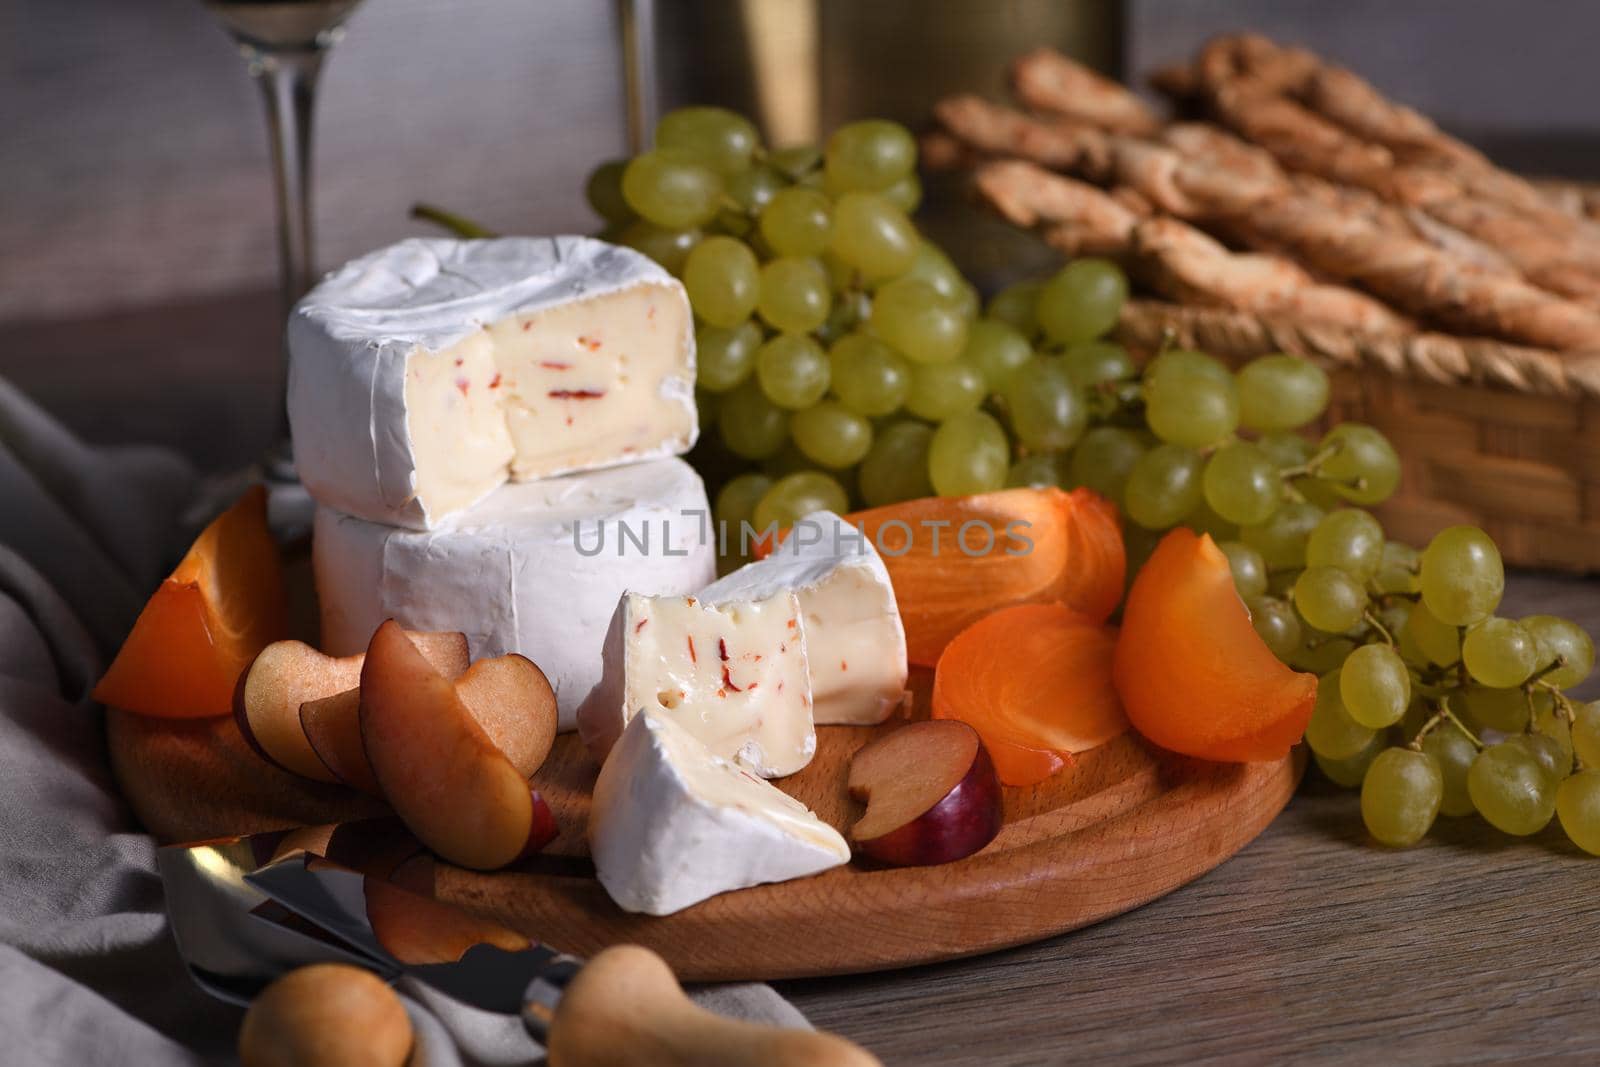 Cheese camembert with fruit and wine by Apolonia